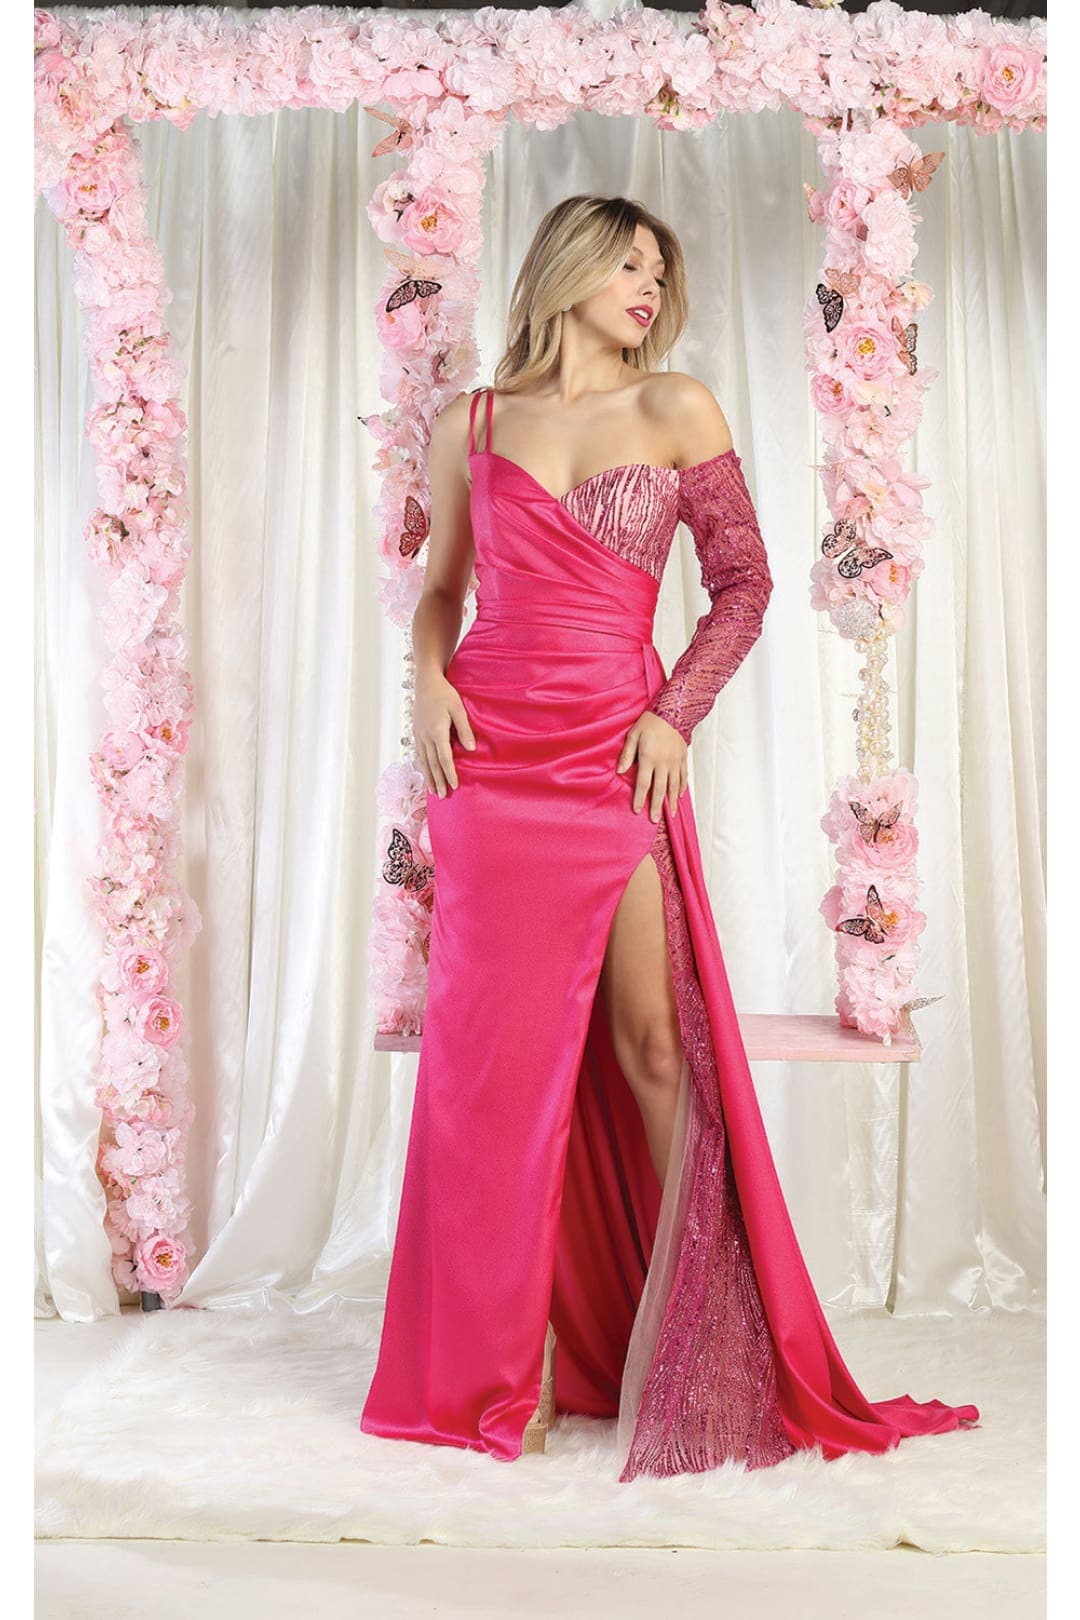 May Queen MQ2003 One Shoulder Embellished Prom Gown - FUCHSIA / 4 - Dress